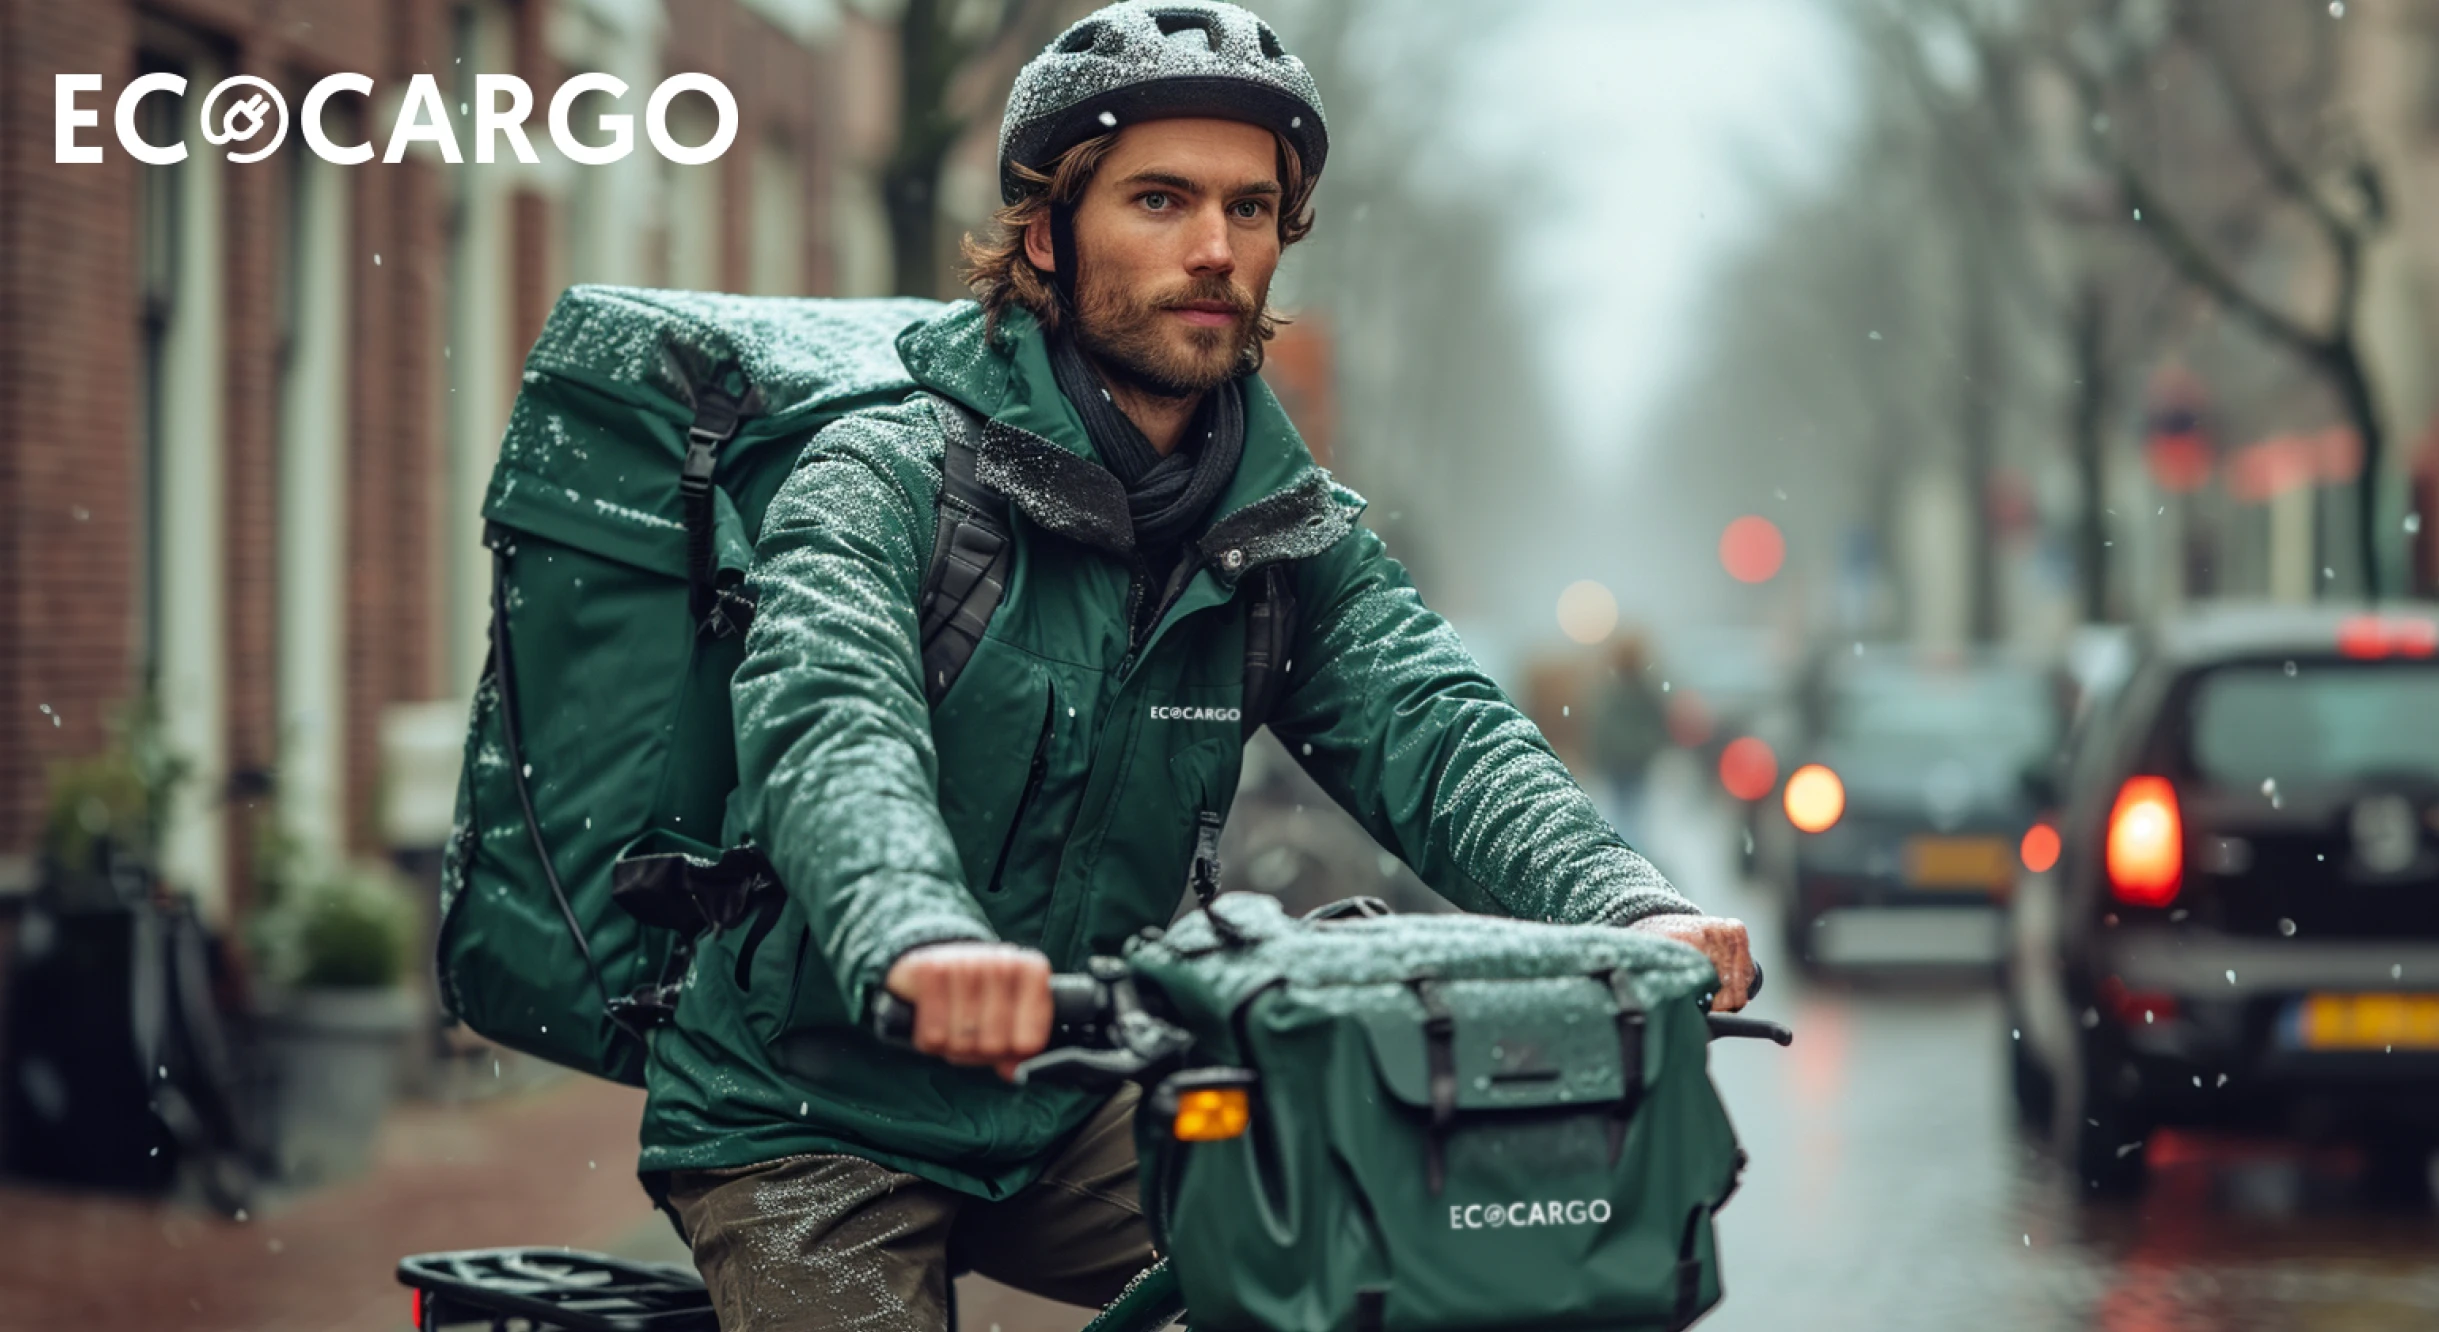 EcoCargo branded delivery guy